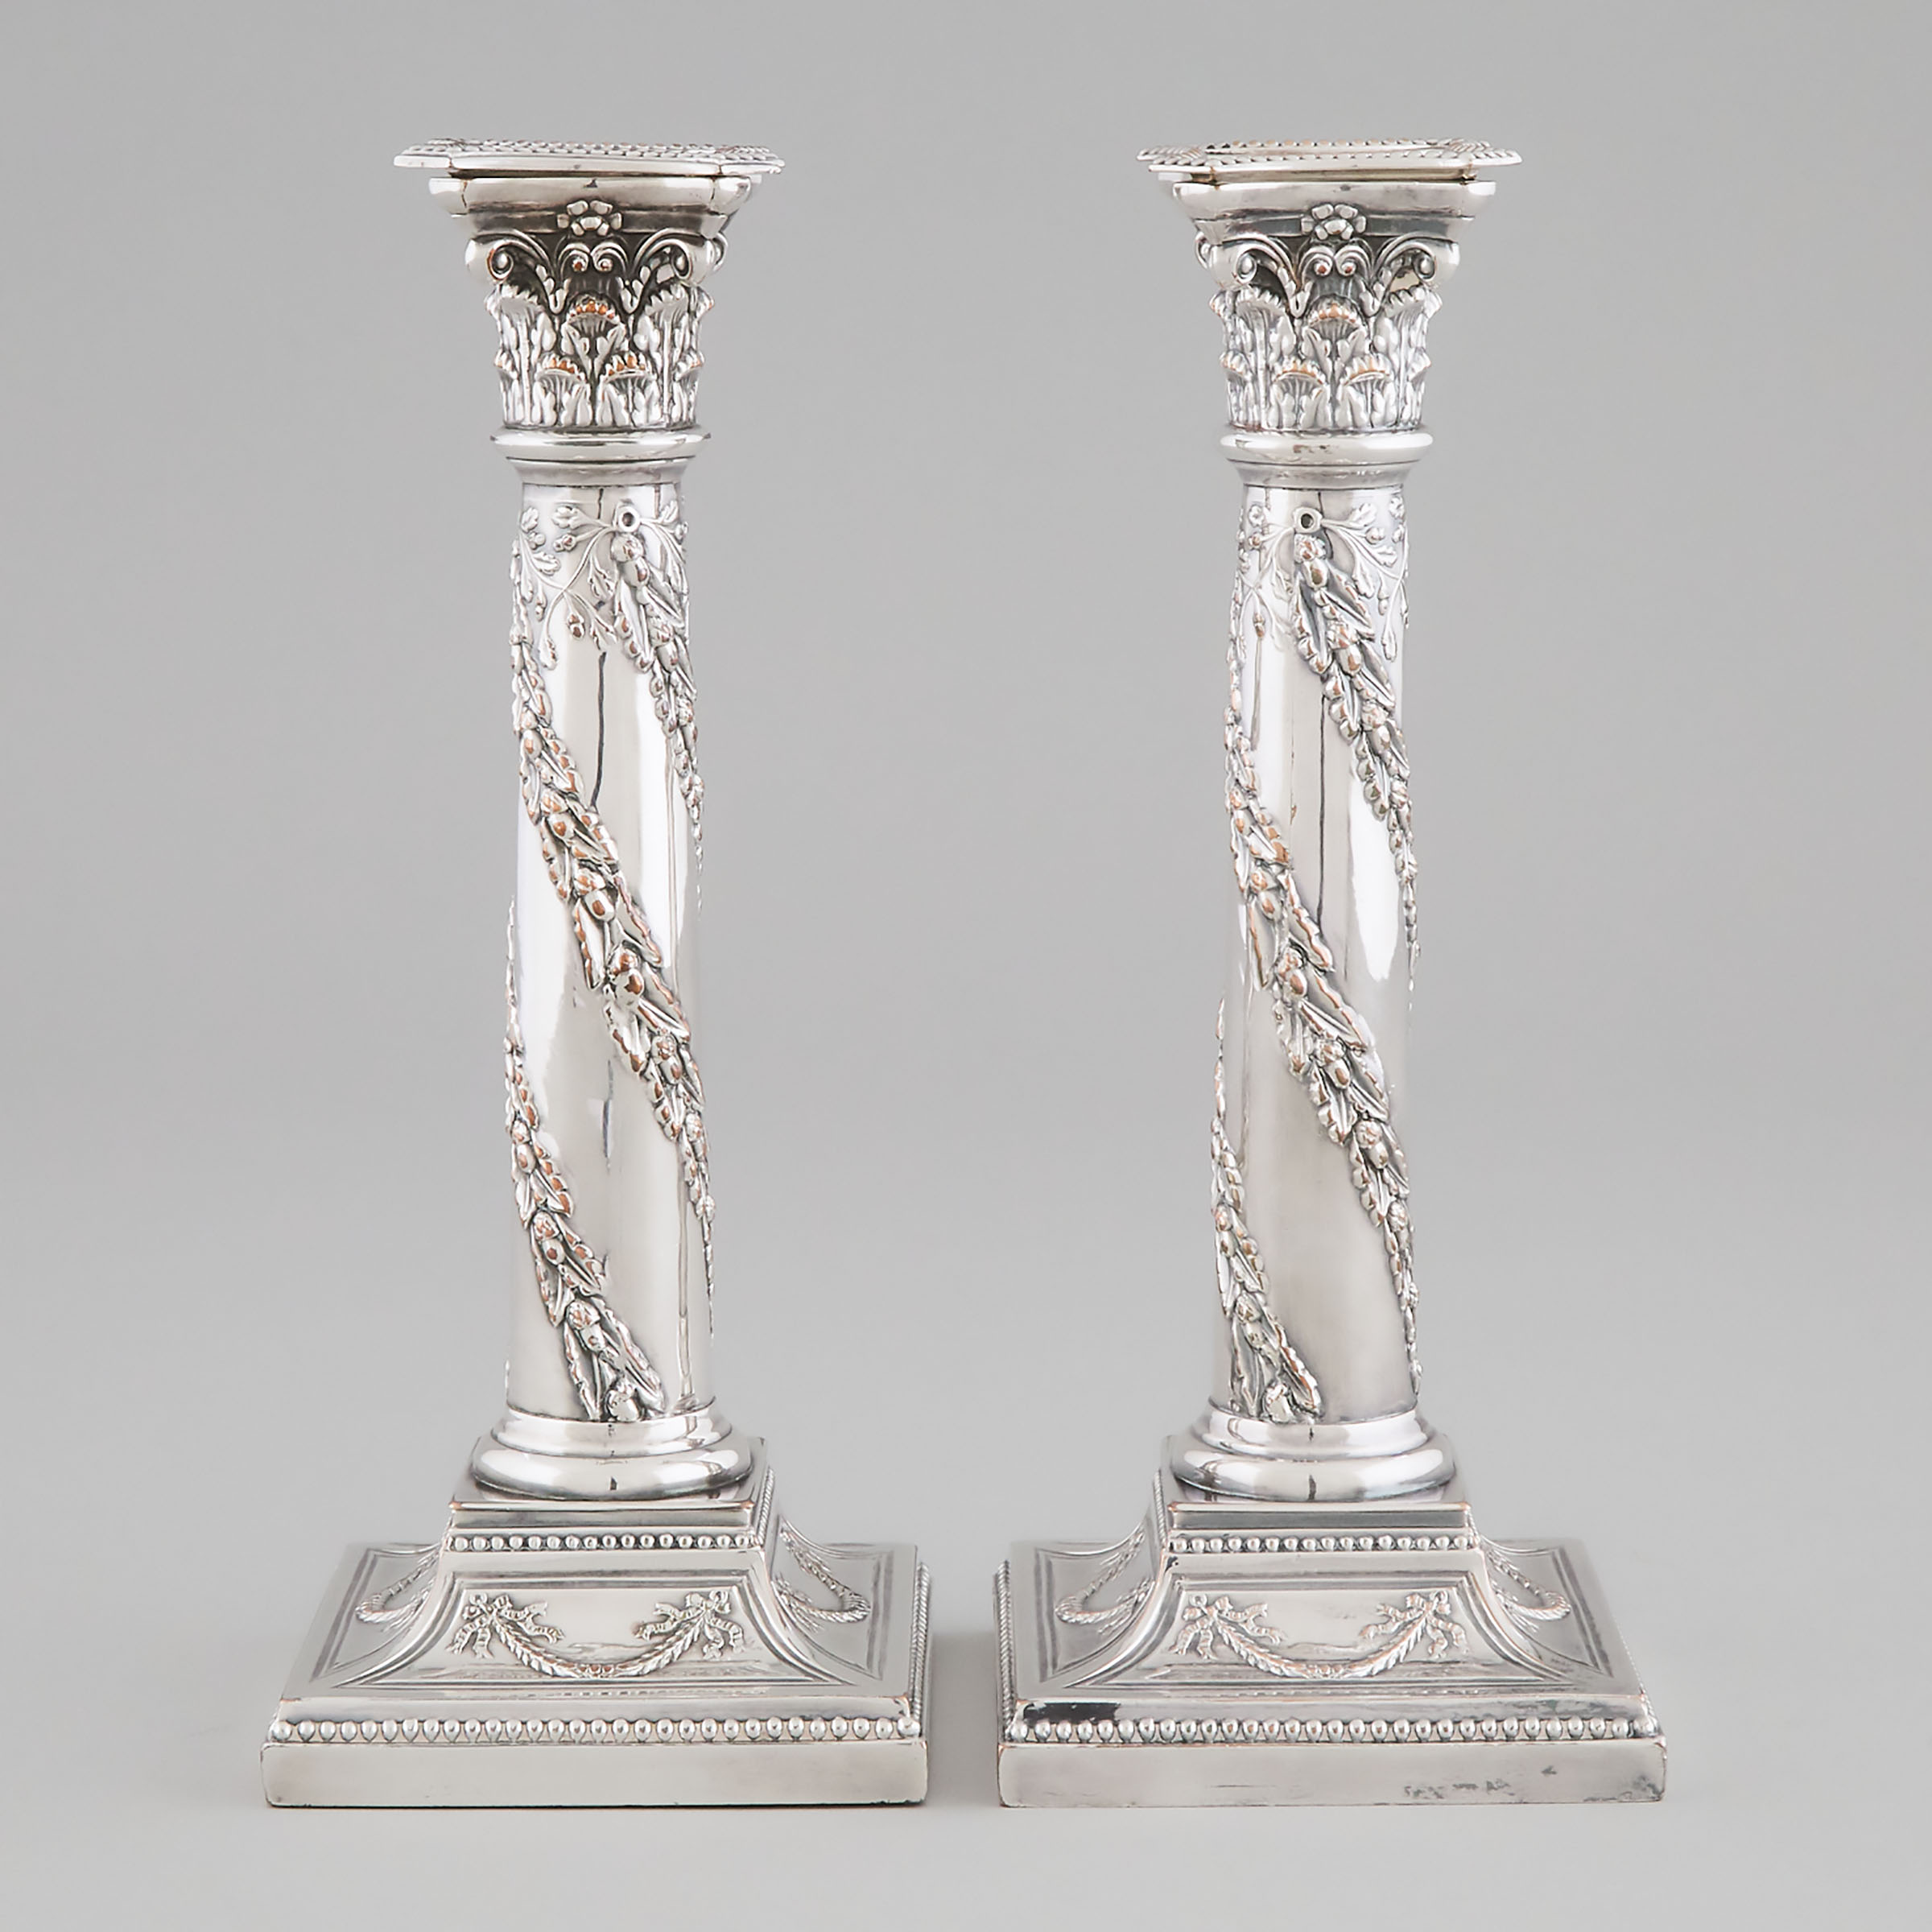 Pair of Edwardian Silver Plated Table Candlesticks, c.1900